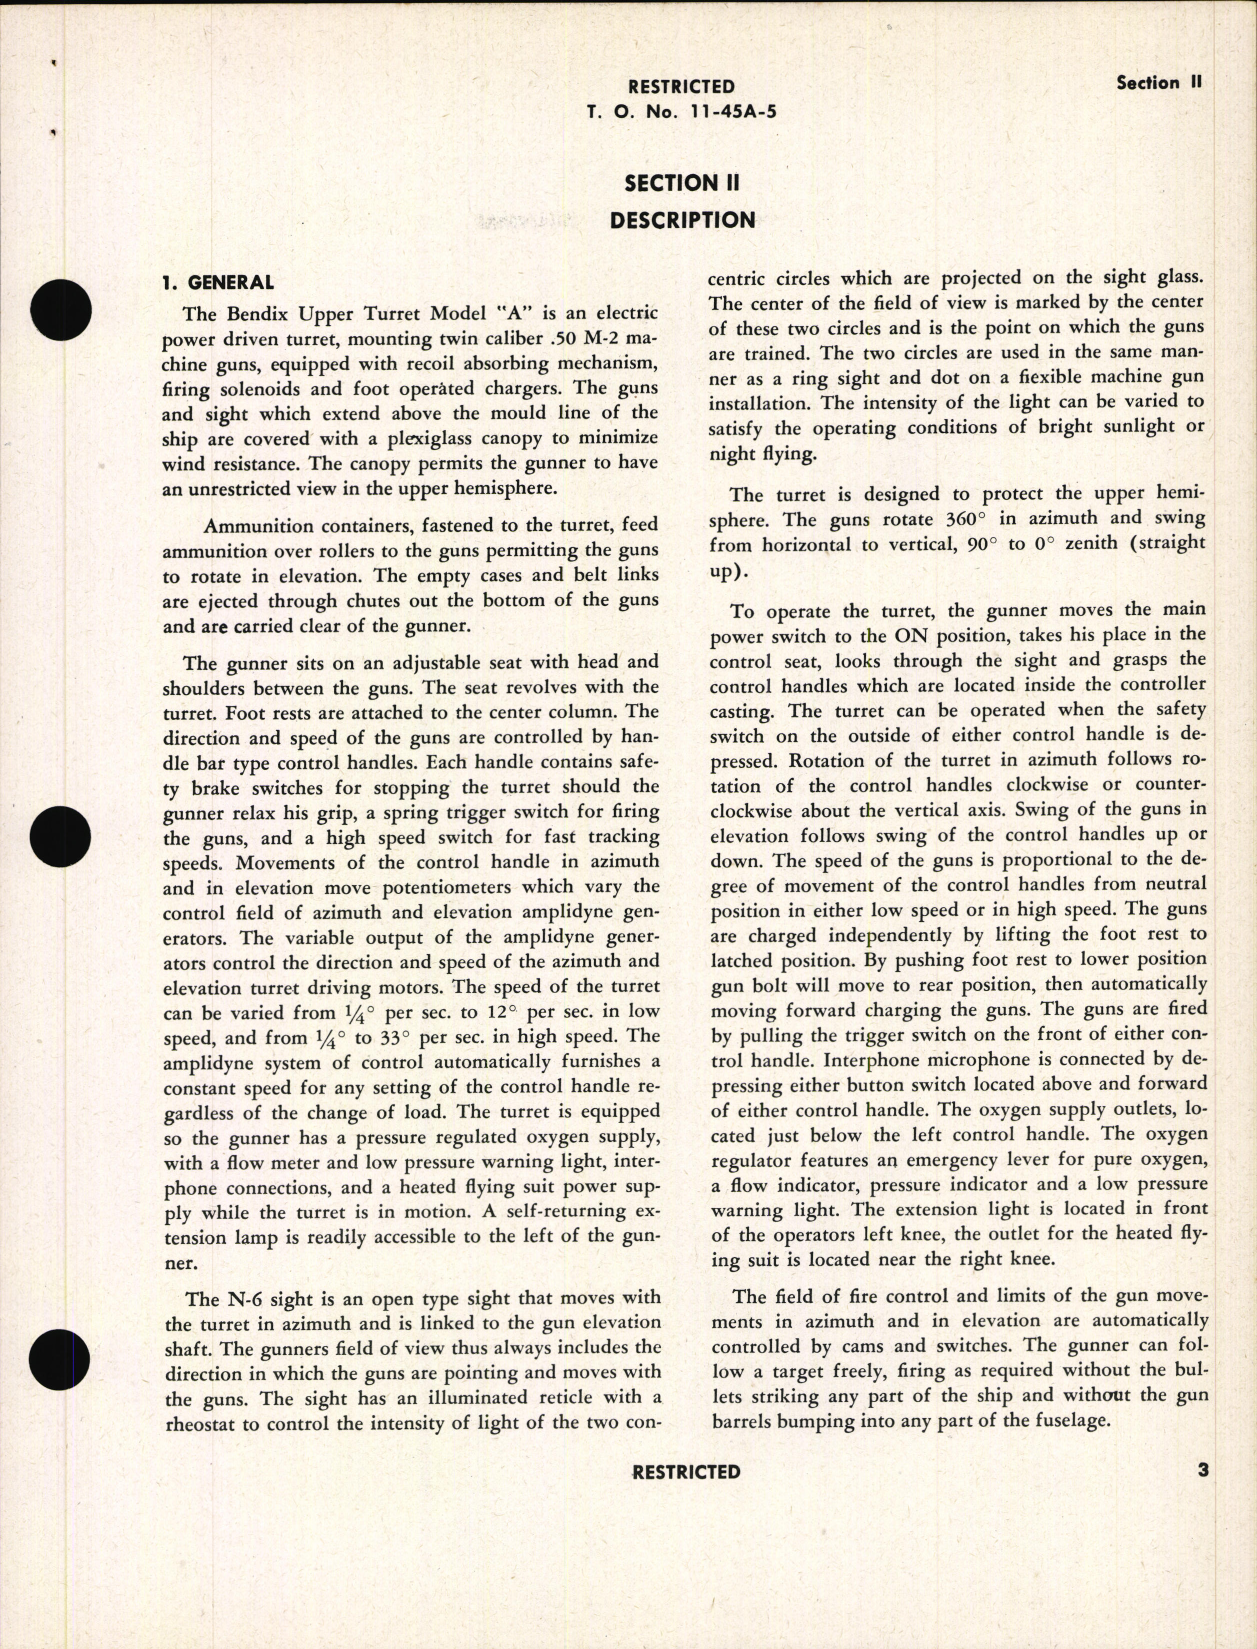 Sample page 7 from AirCorps Library document: Operation and Service Instructions for Model 